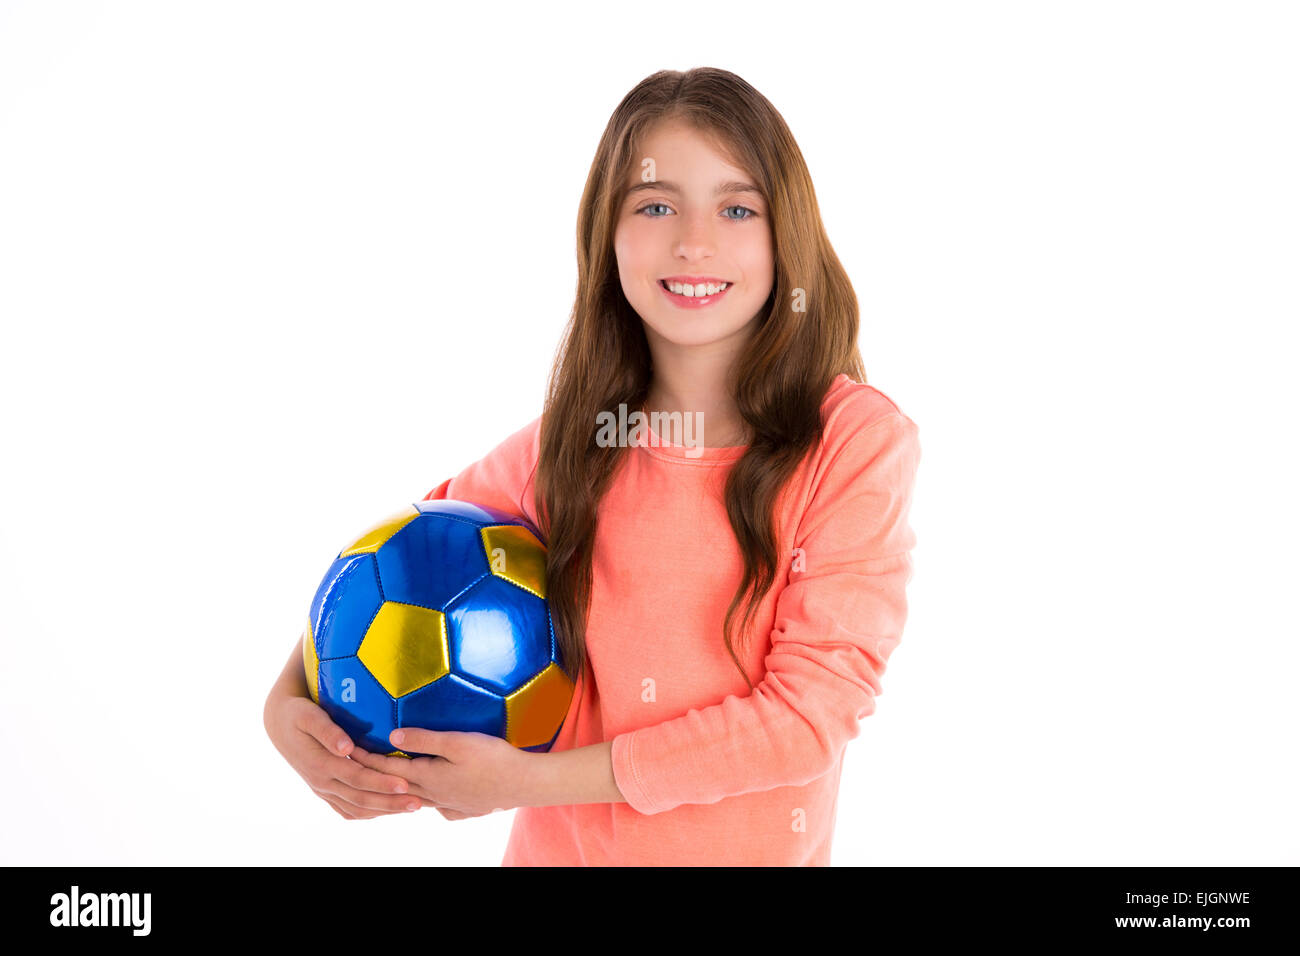 Football soccer kid girl happy player with ball on white background Stock Photo